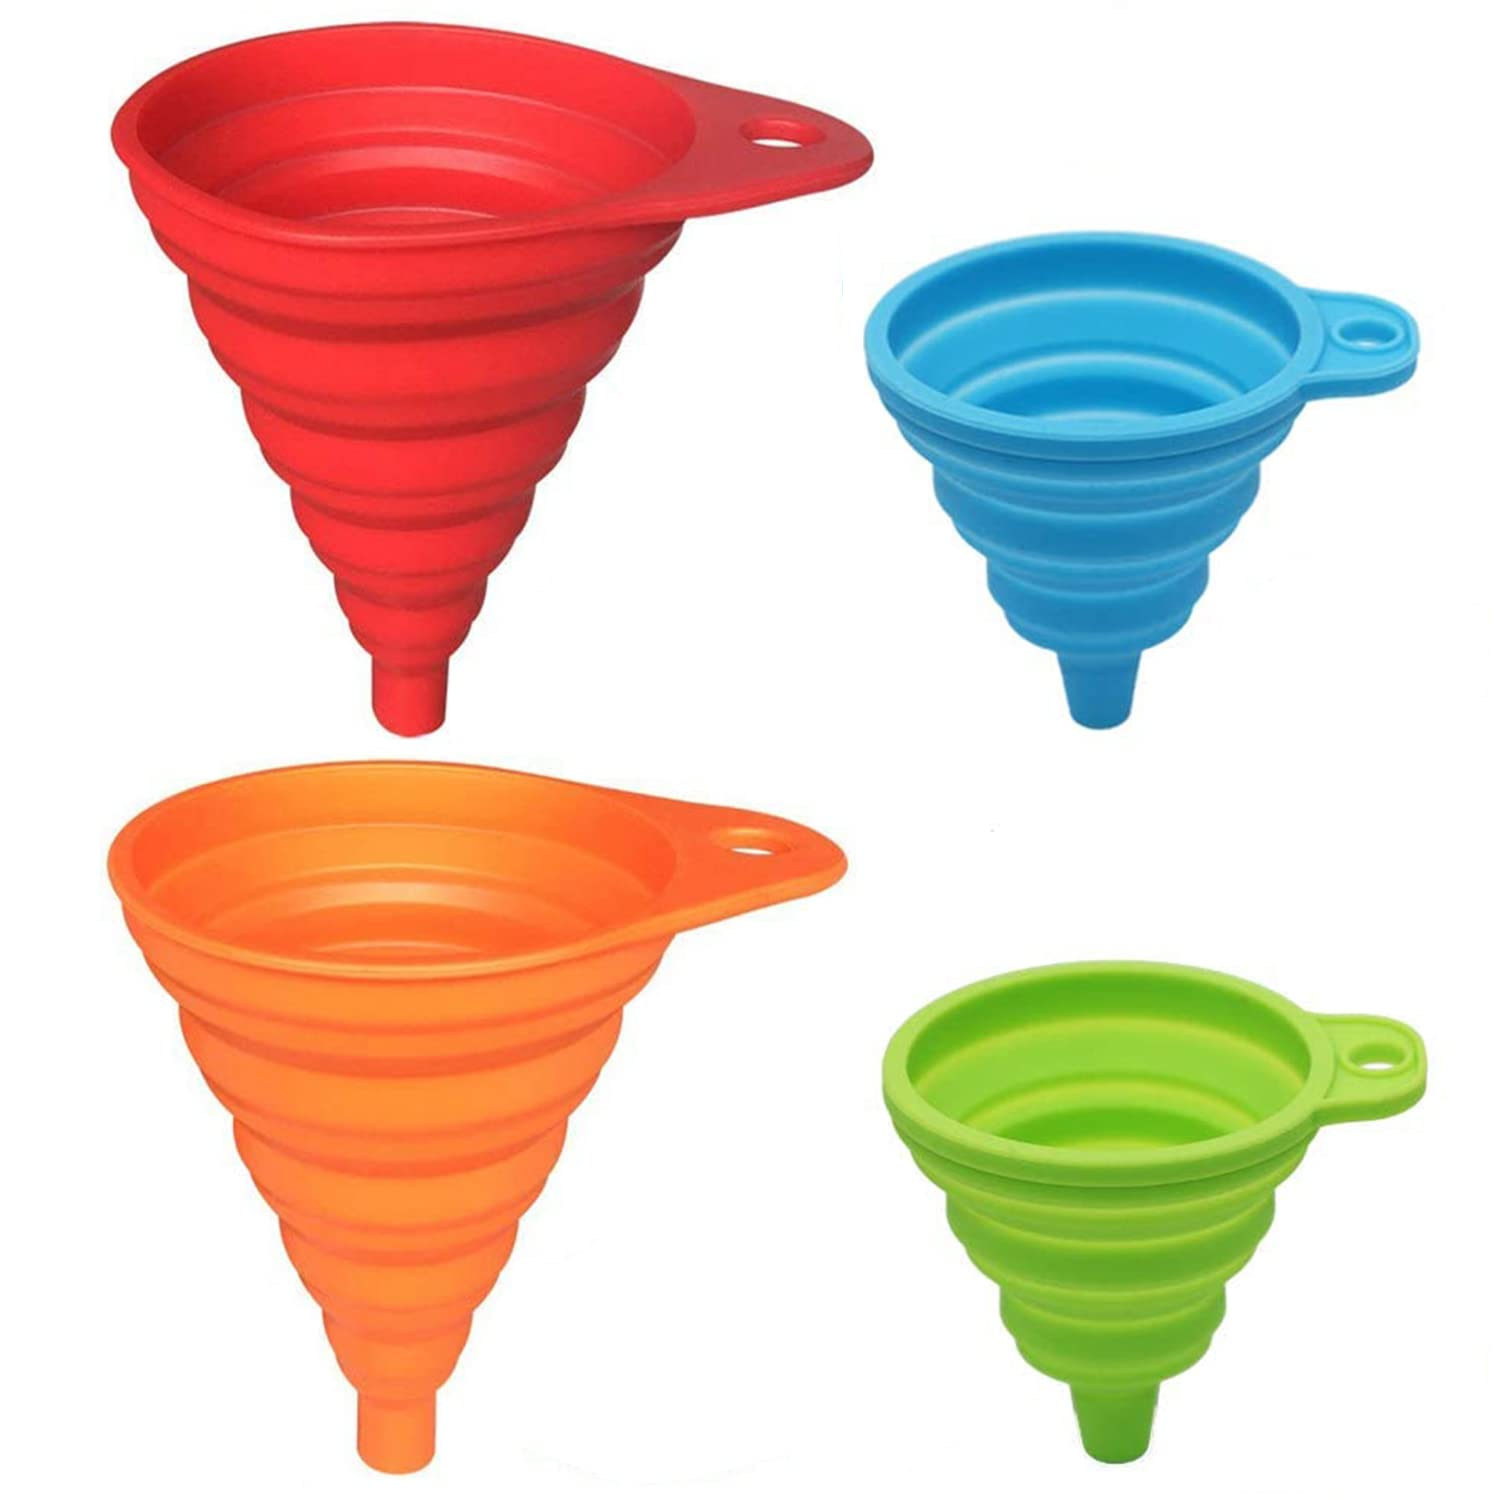 Collapsible Funnels for Kitchen Use, Mini Small Medium and Large 4 Foldable Funnel Sets for Filling Bottles Canning and Jar, Food Kitchen Items, BPA Free, Heat Resistant